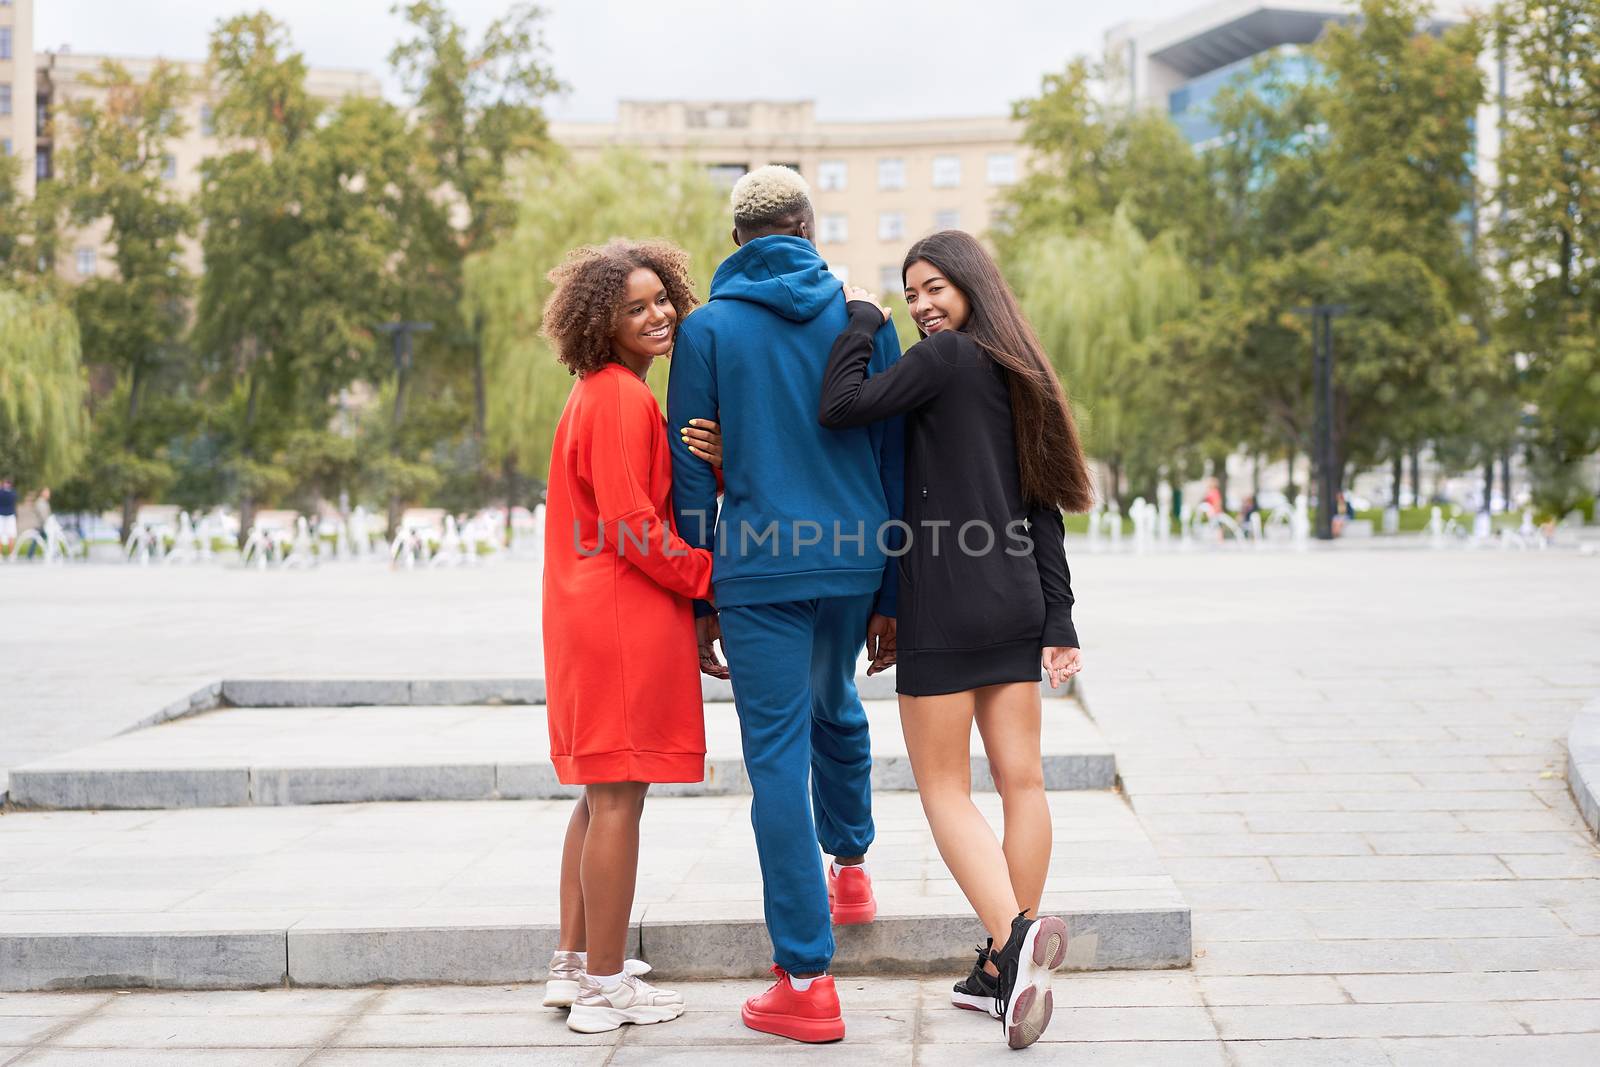 Multi ethnic friends outdoor. Two woman in love with one guy Diverse group people Afro american asian spending time together Multiracial male female student walking park outdoors